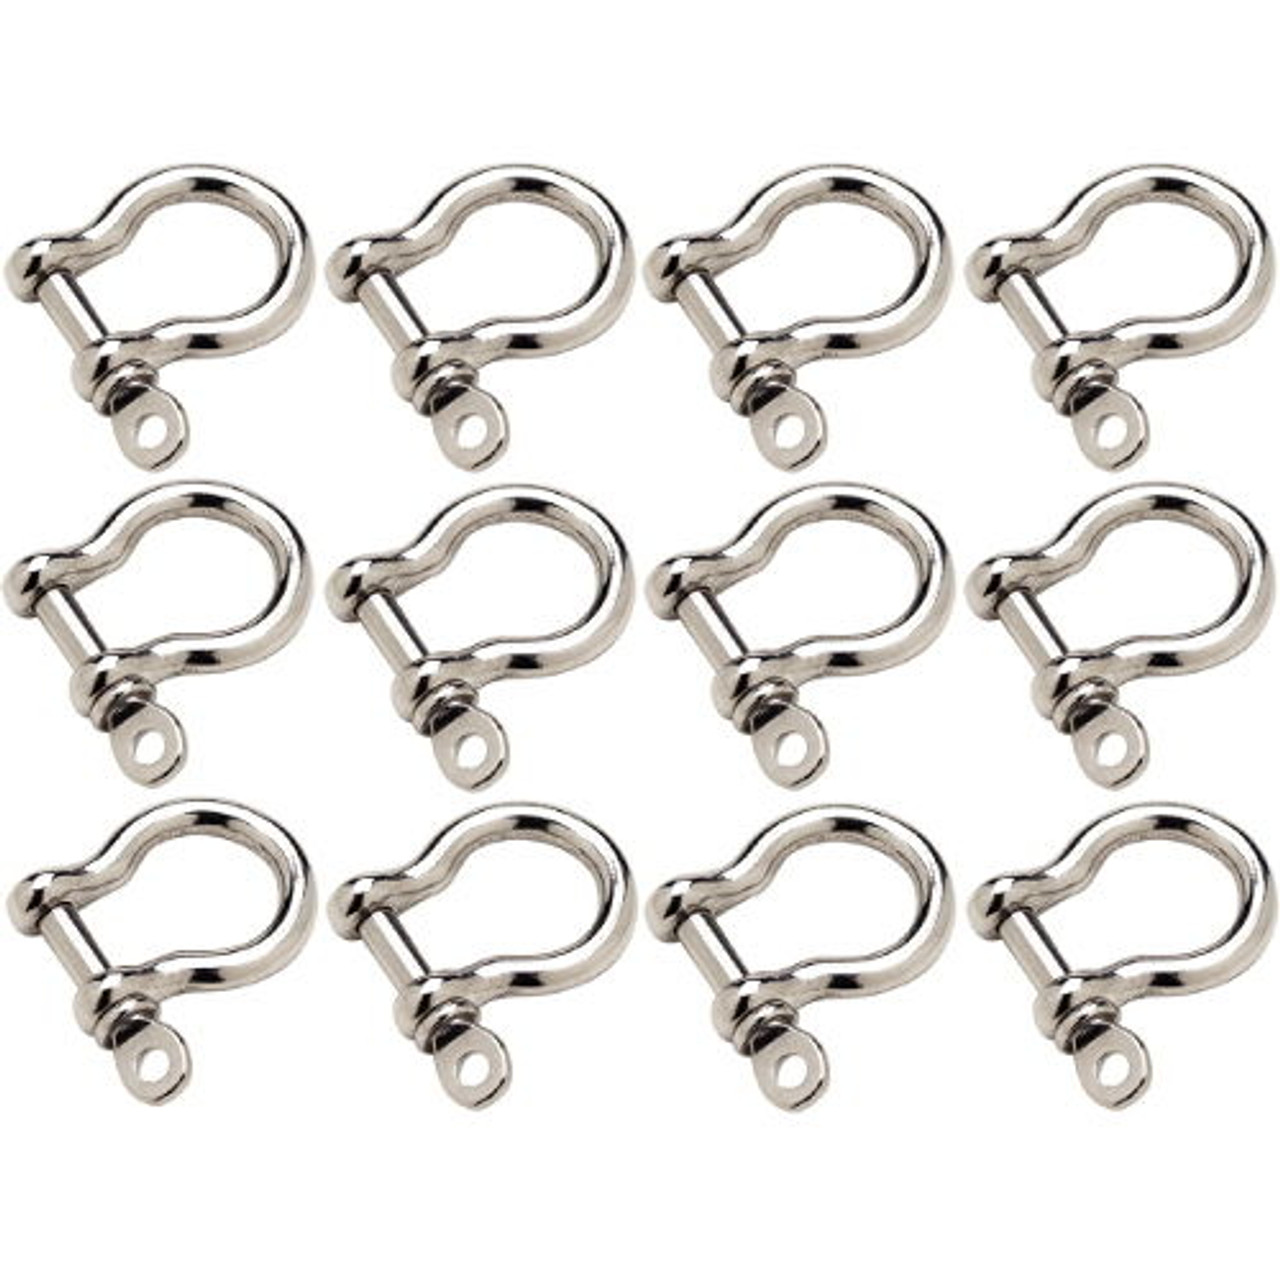 12 Pack of 3/8 Inch Stainless Steel Anchor Shackles 8,000 lbs Breaking Strength